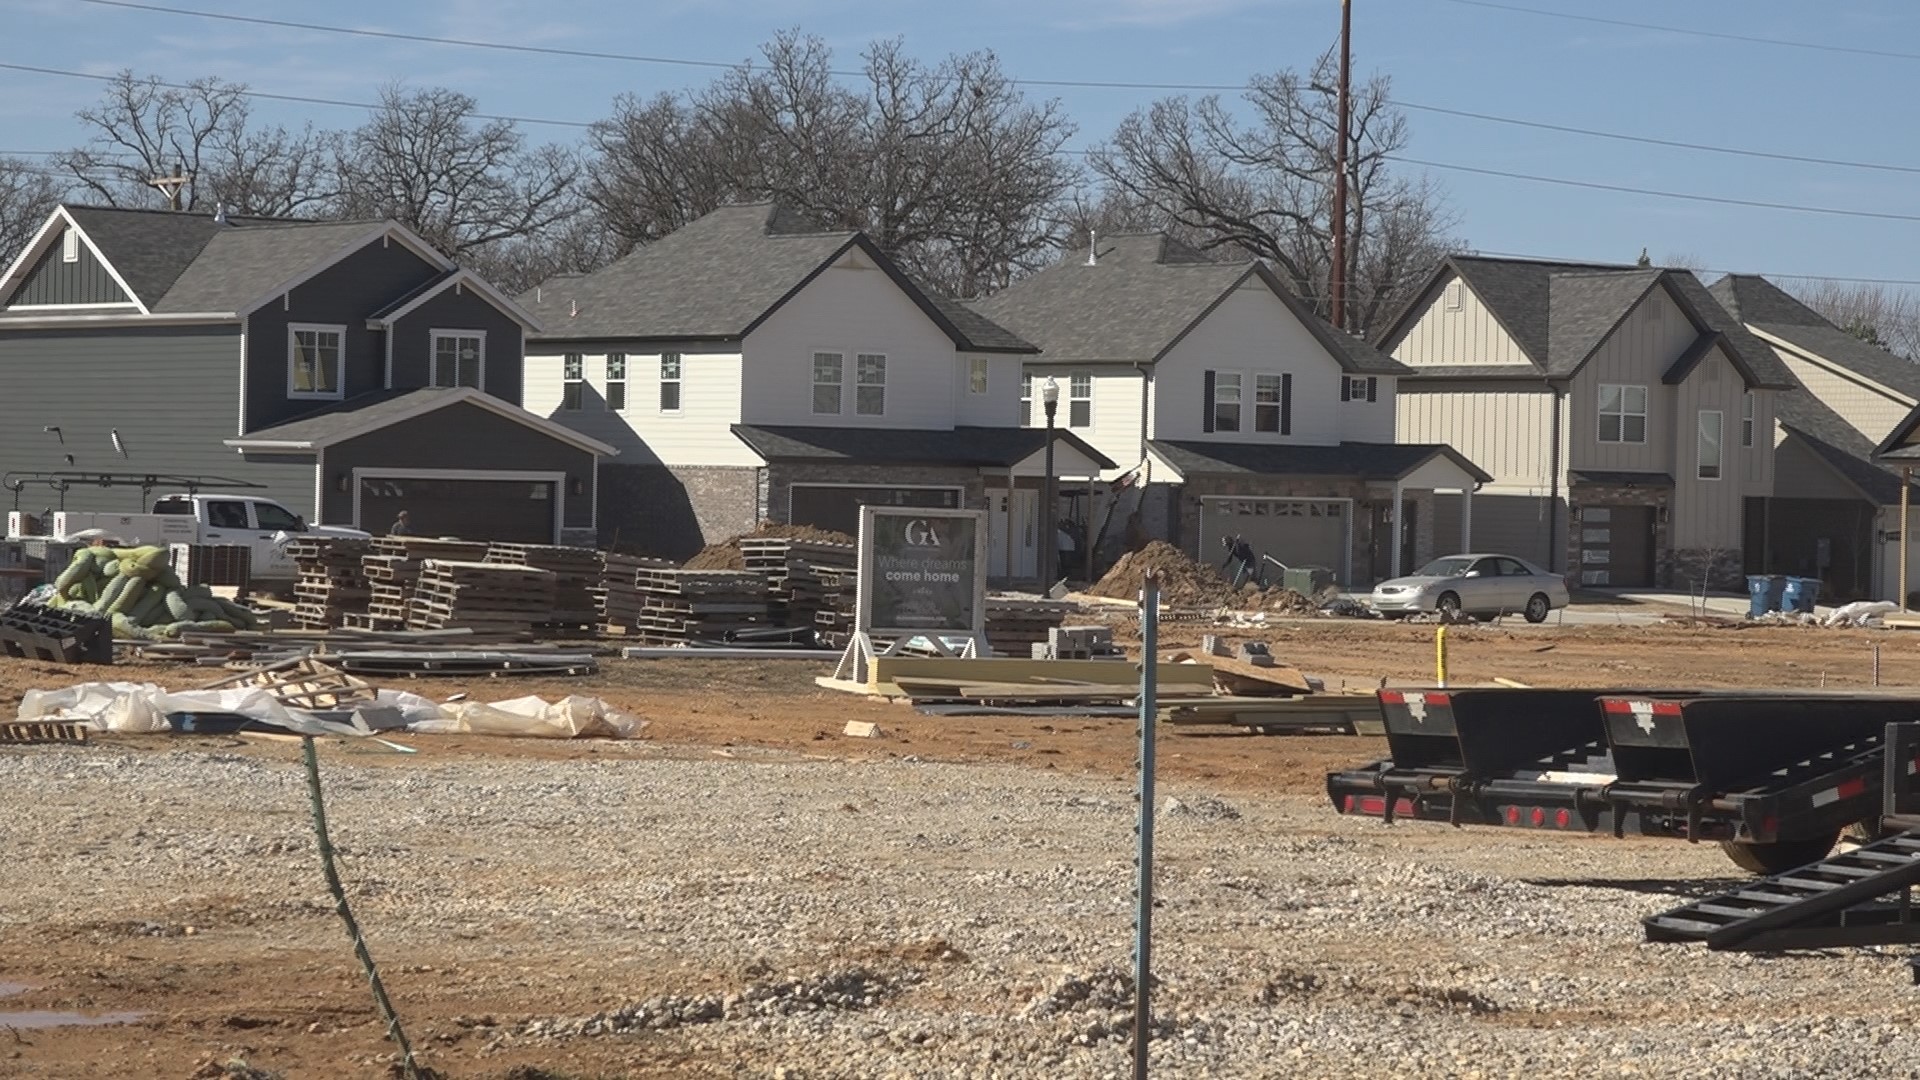 With a lack of affordable housing across NWA, the Bentonville housing affordability workgroup is looking to break those barriers.